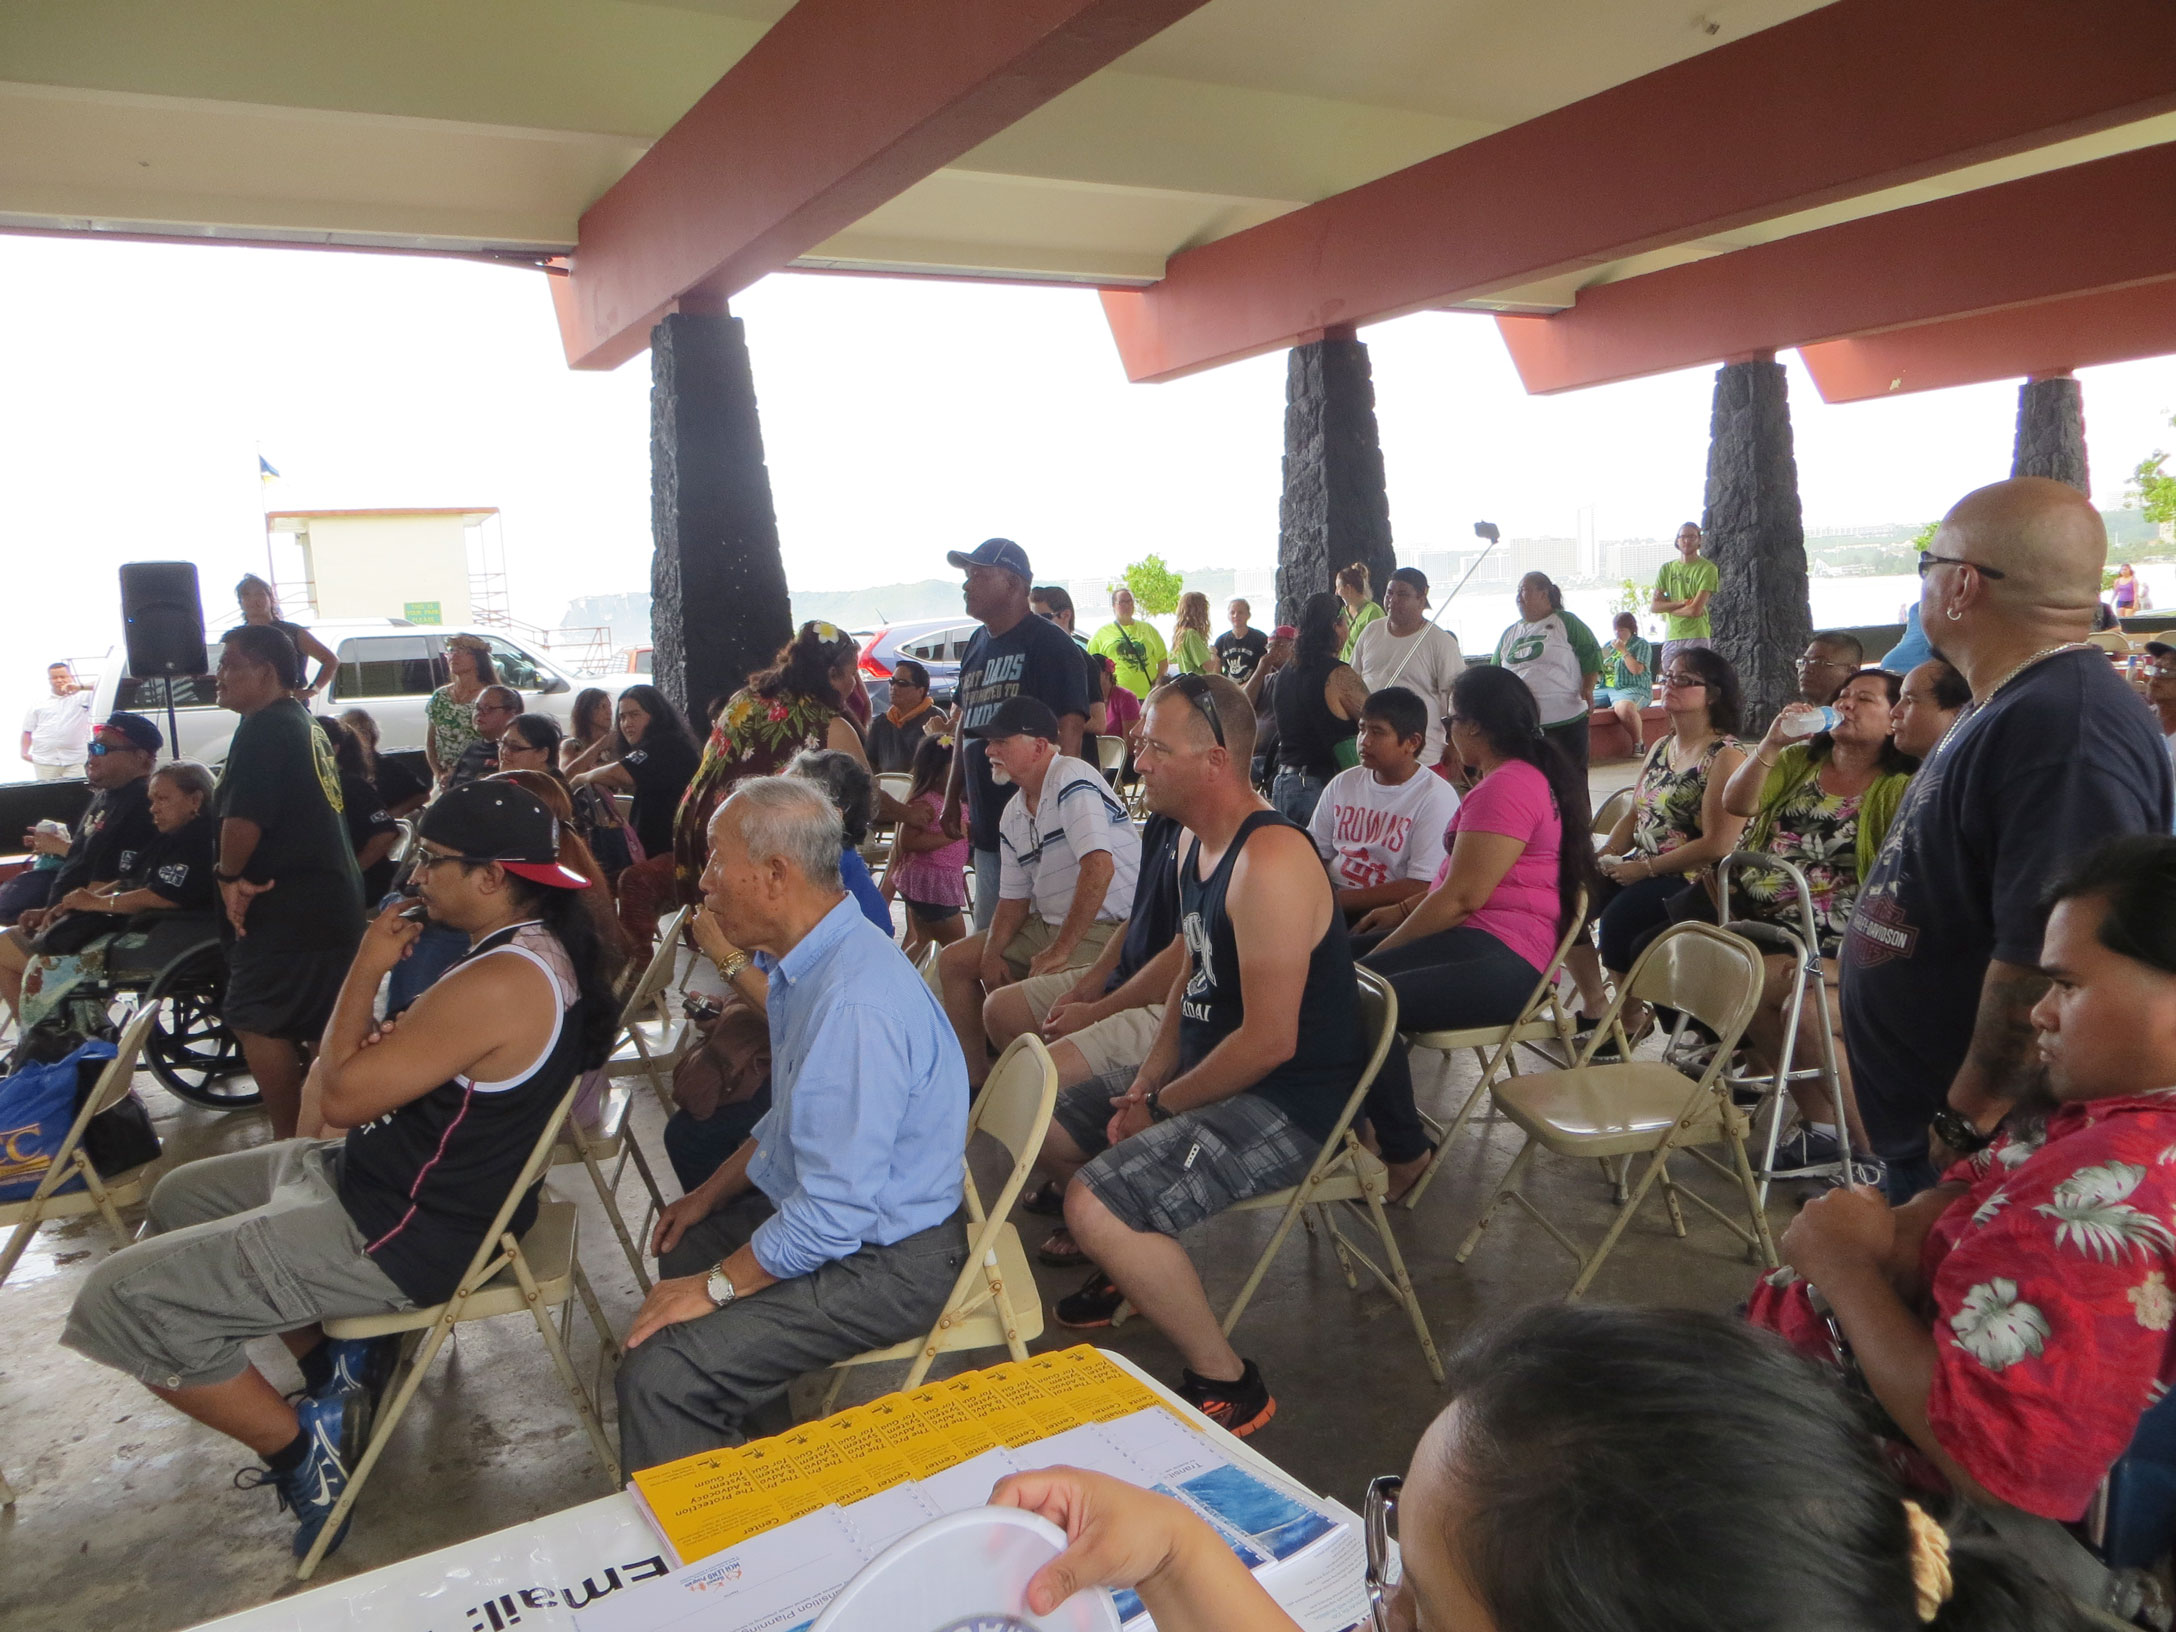 Crowd of participants seated under outdoor pavilion.